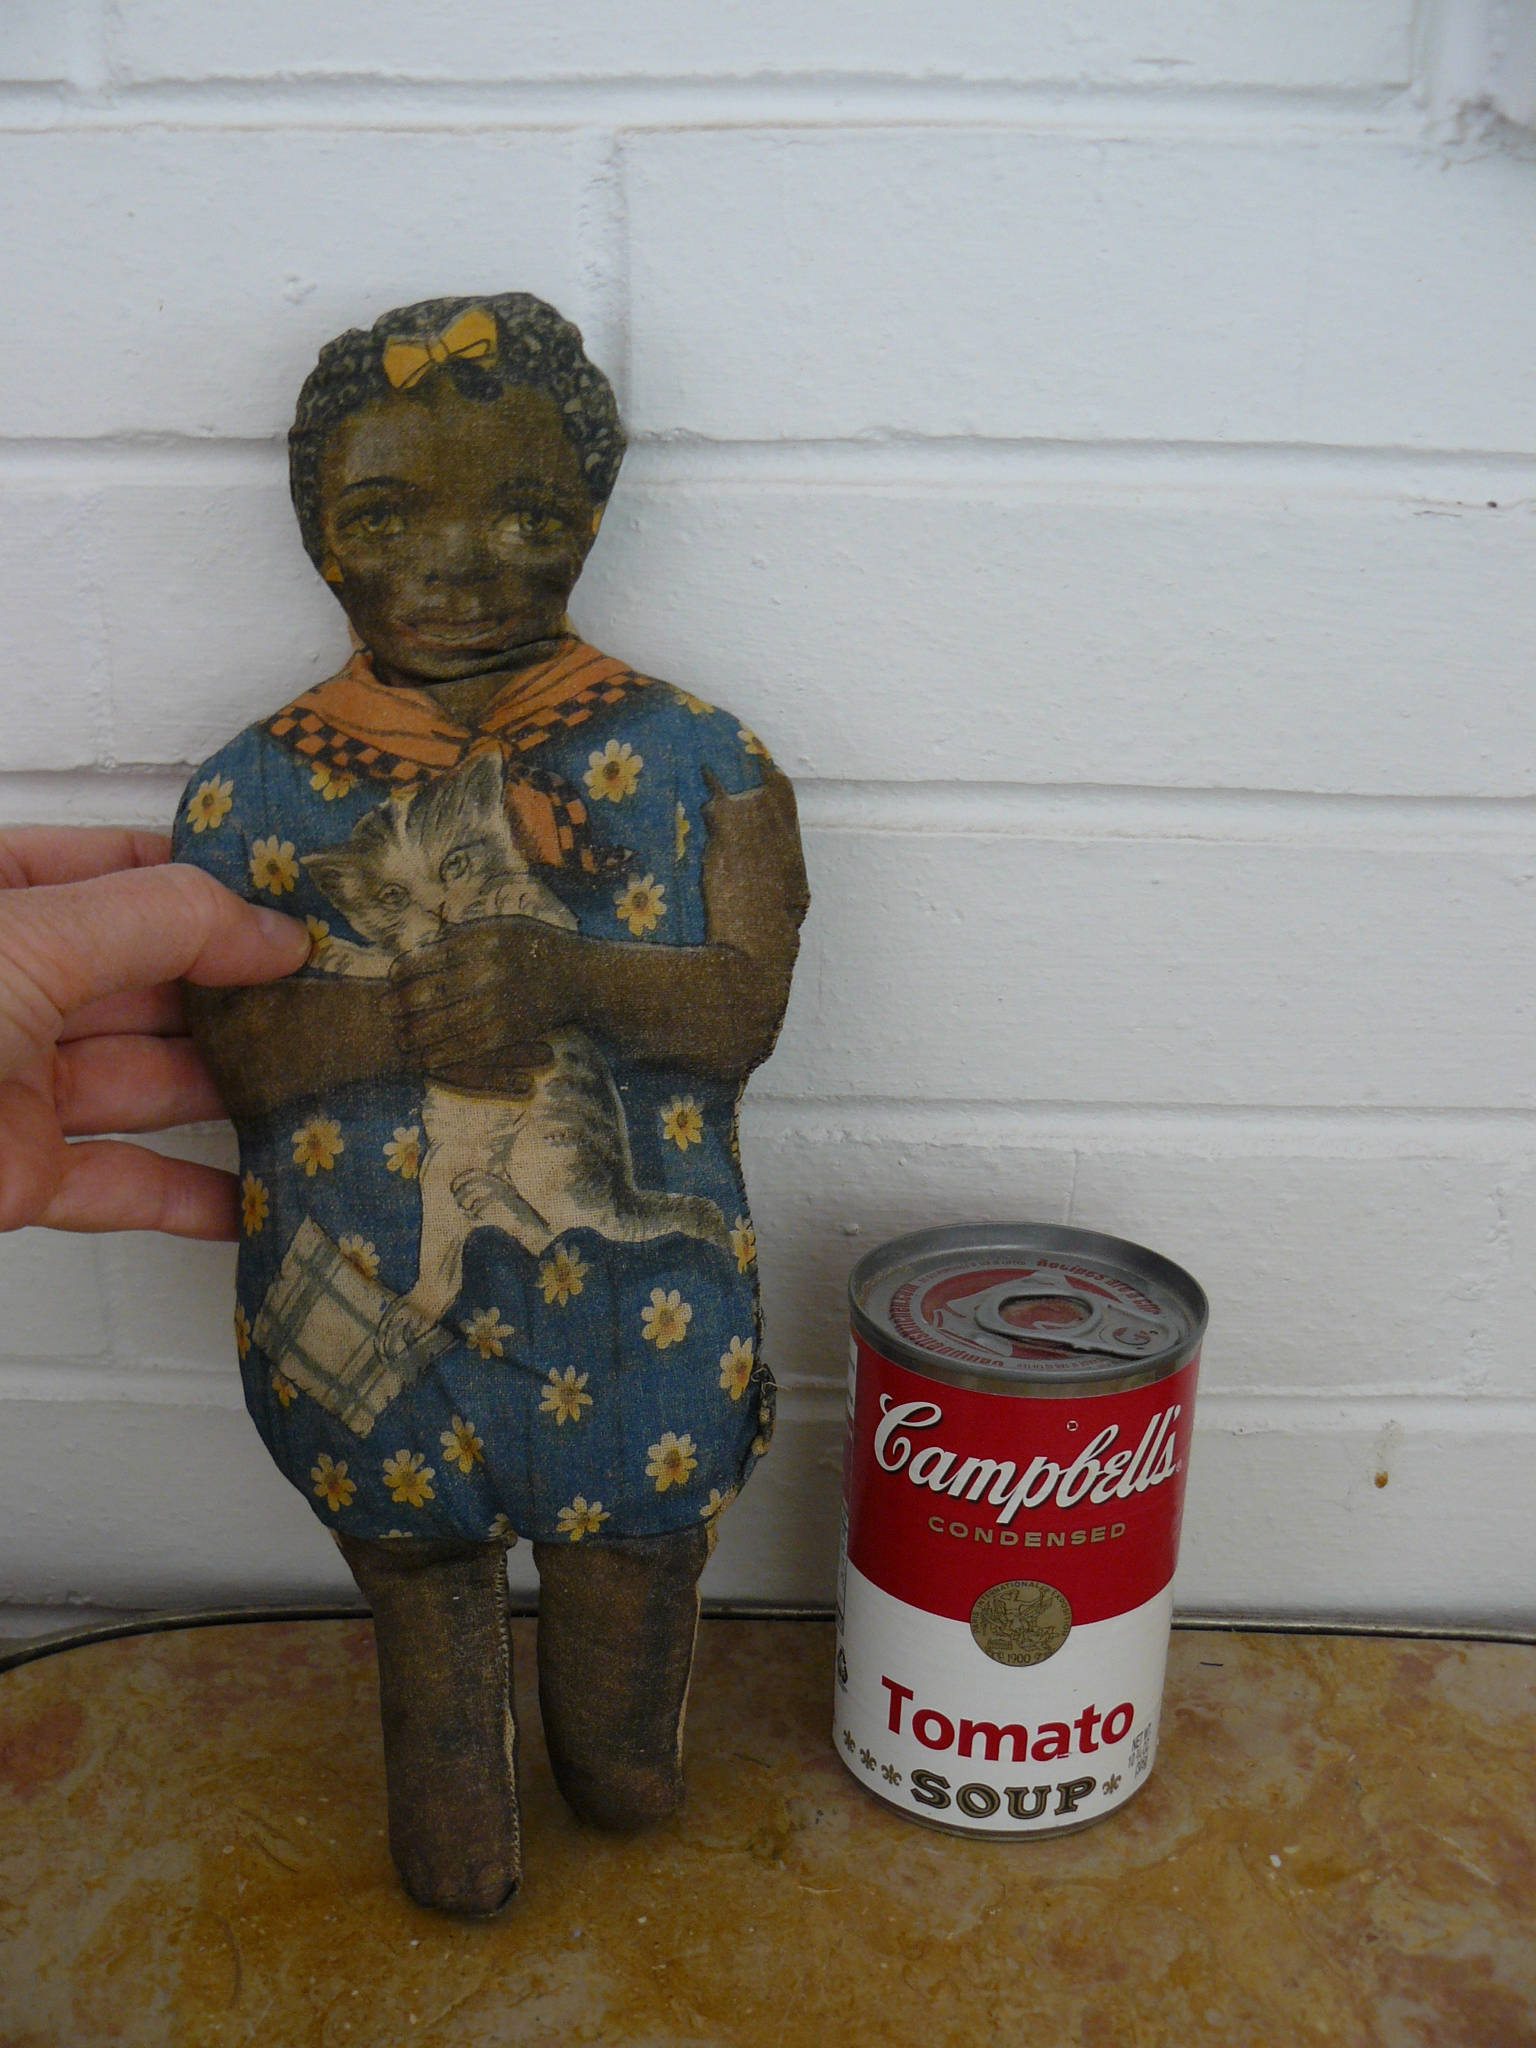 12 Antique Black Americana Rag Doll Toy Collection sold at auction